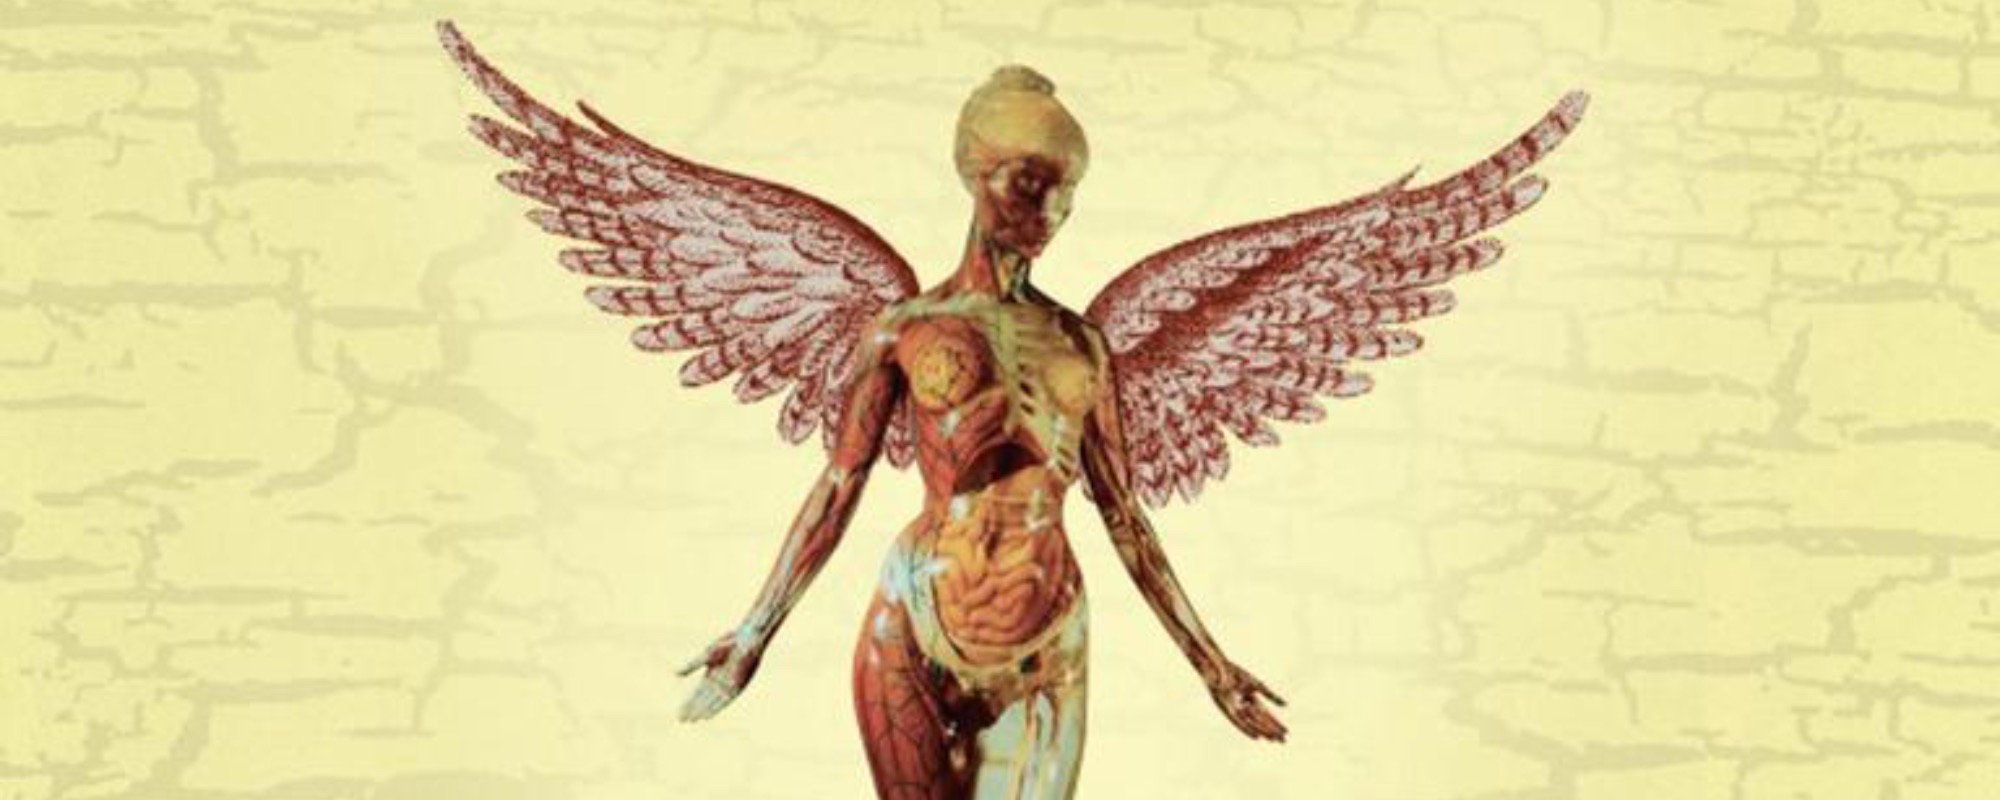 The Story Behind Nirvana's 'In Utero' Album Cover